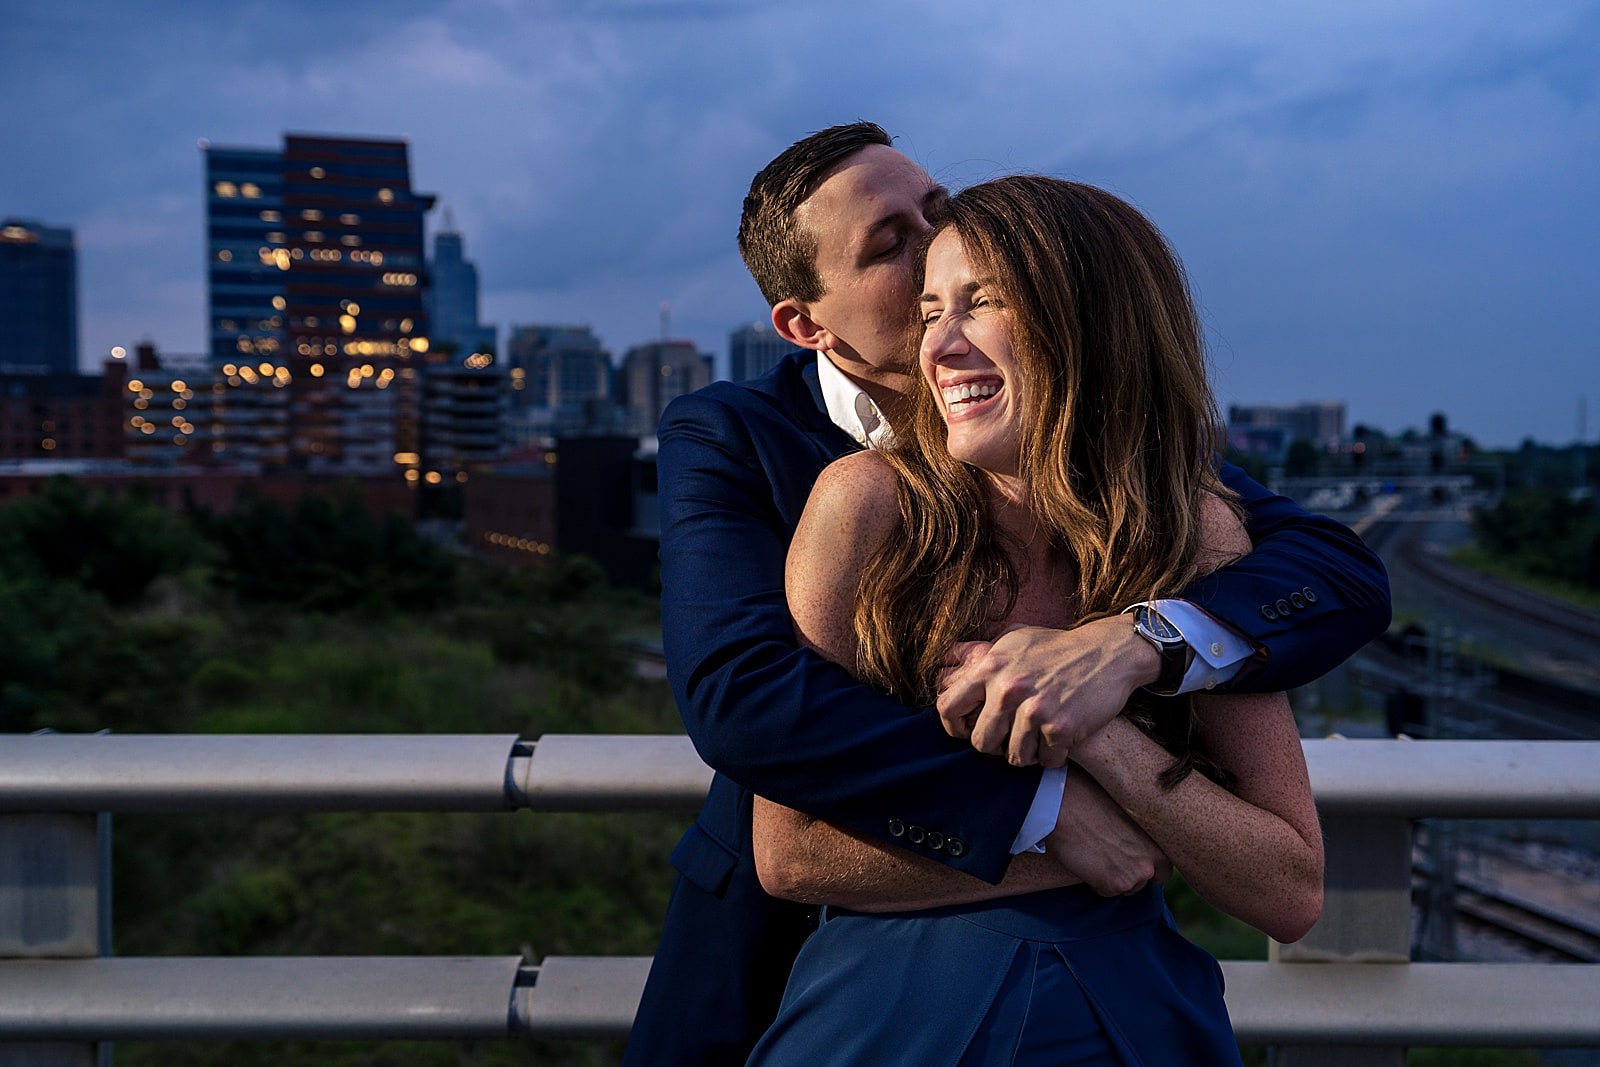 Raleigh engagement photographer says make sure you get a shot with the Raleigh skyline at your engagement session